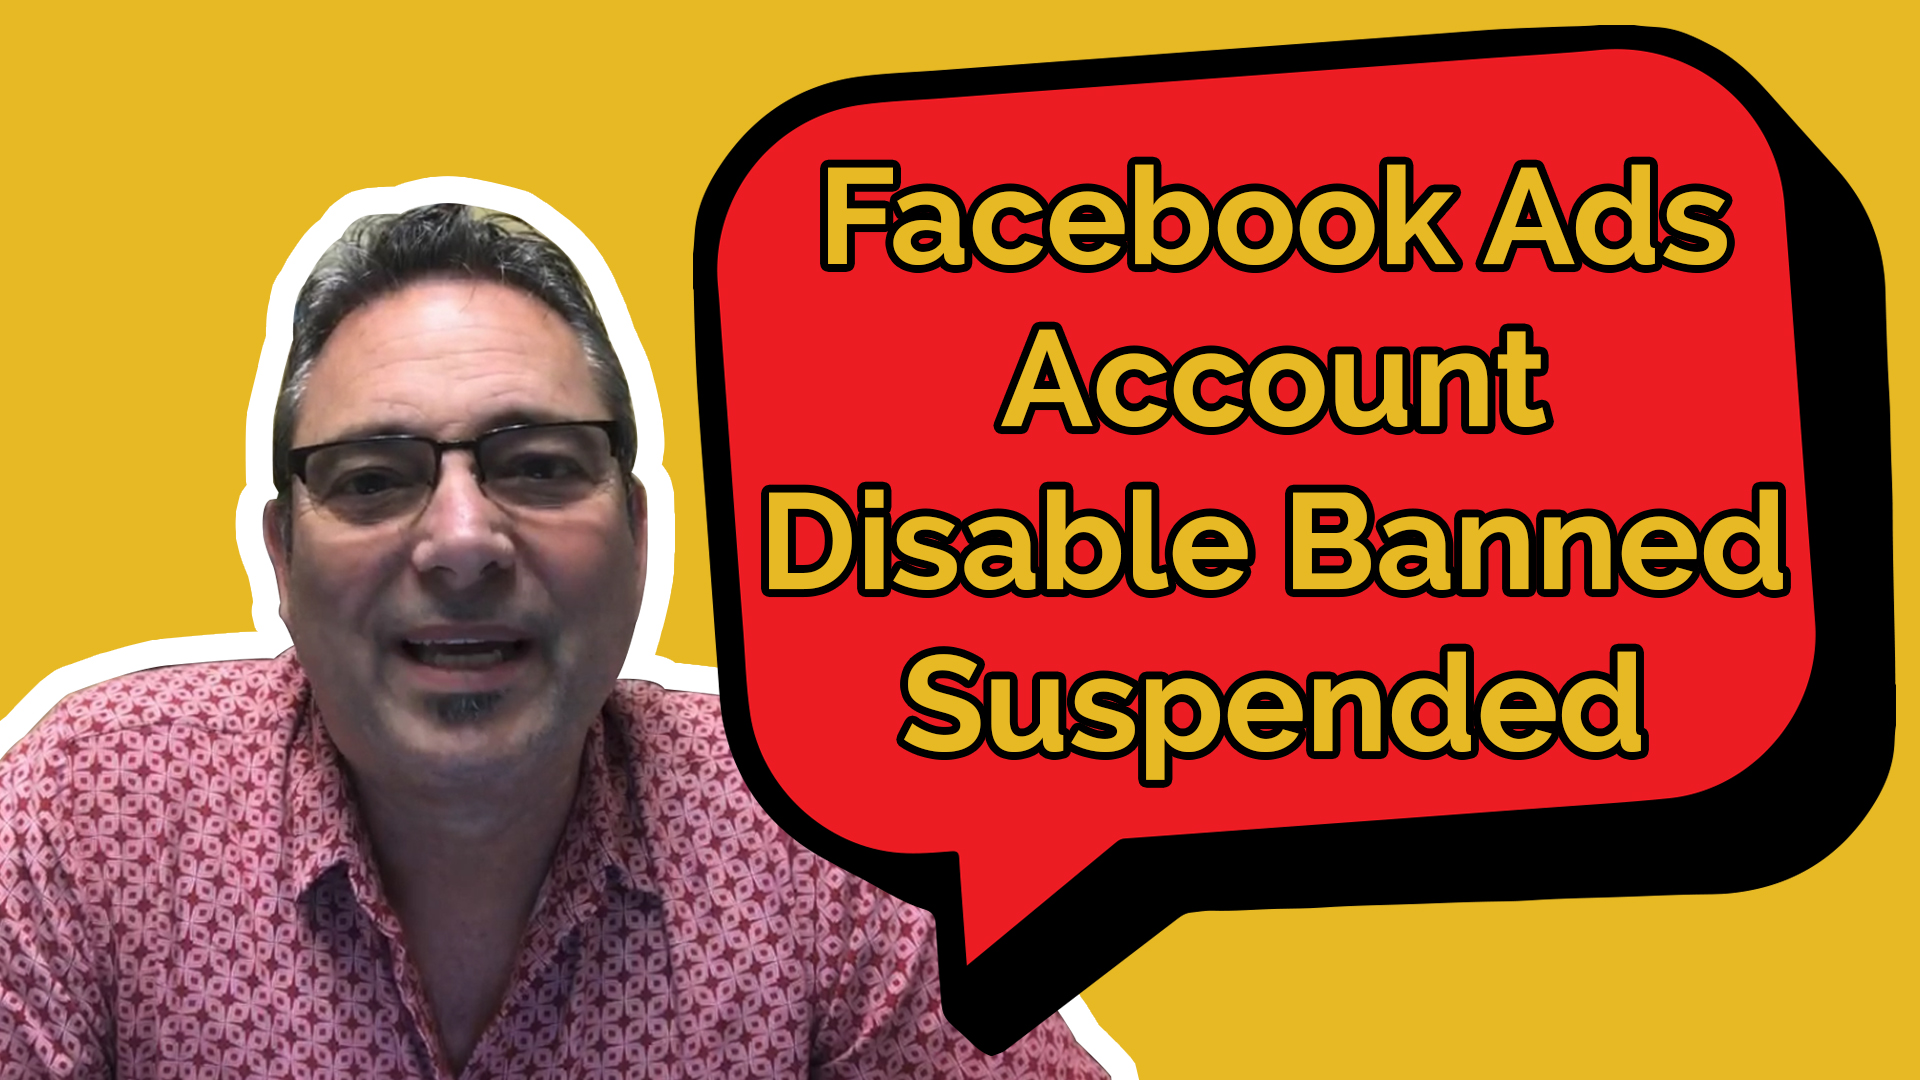 Facebook Ads Account Disabled Banned Suspended